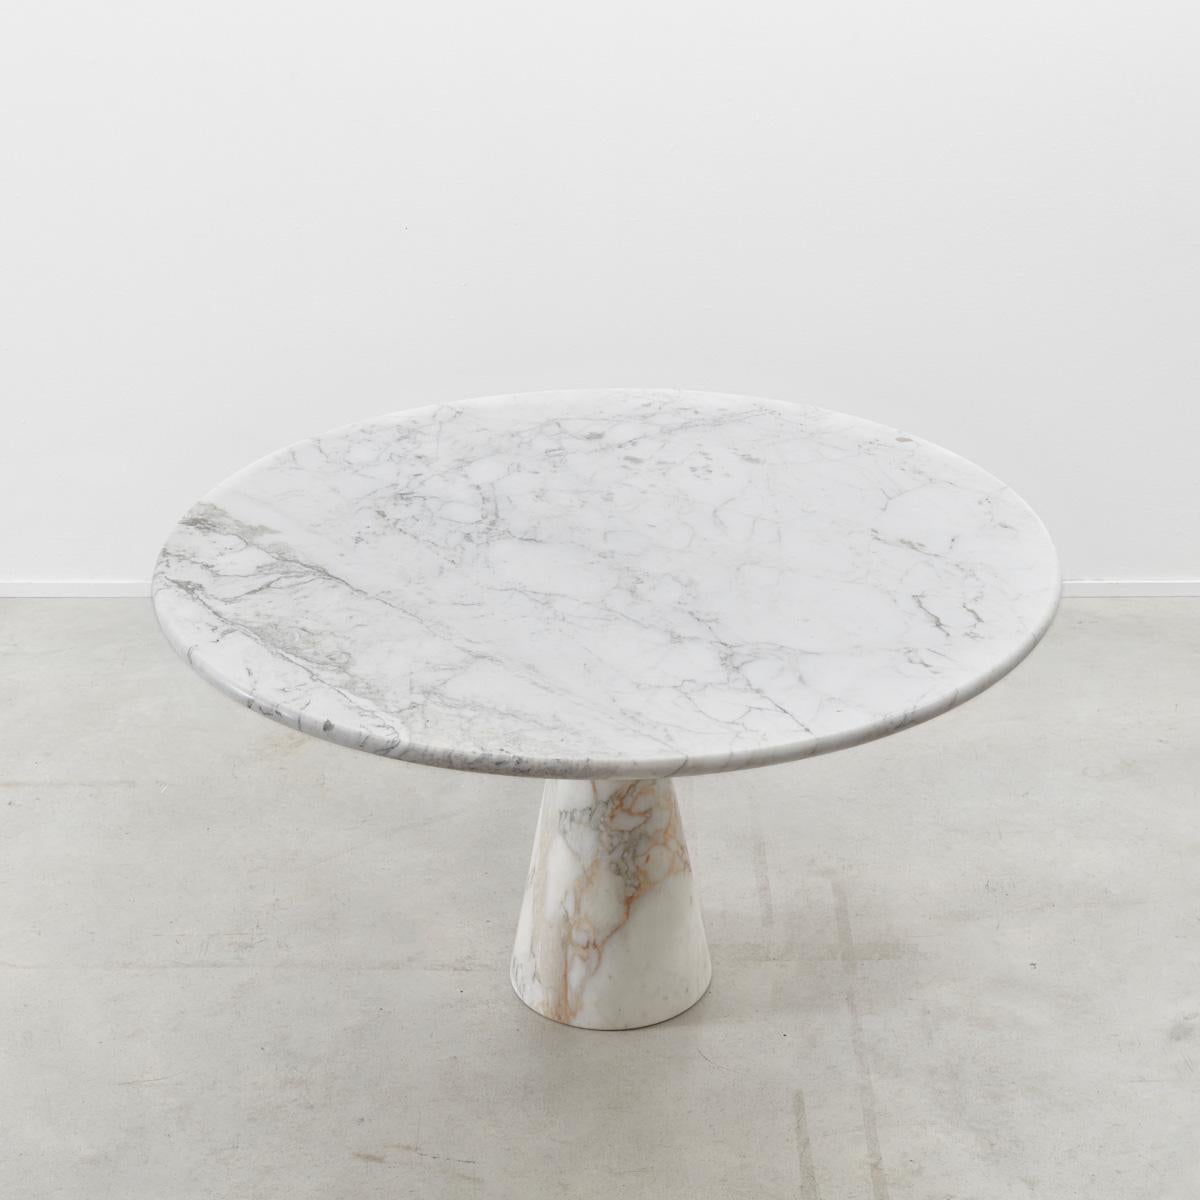 The M1 T70 table’s clean and elegant form is based around architect Angelo Mangiarotti’s desire to create an impressive table using substantial materials without any visible joints. Designed in 1969 for Skipper, it is made solely from solid Calcutta